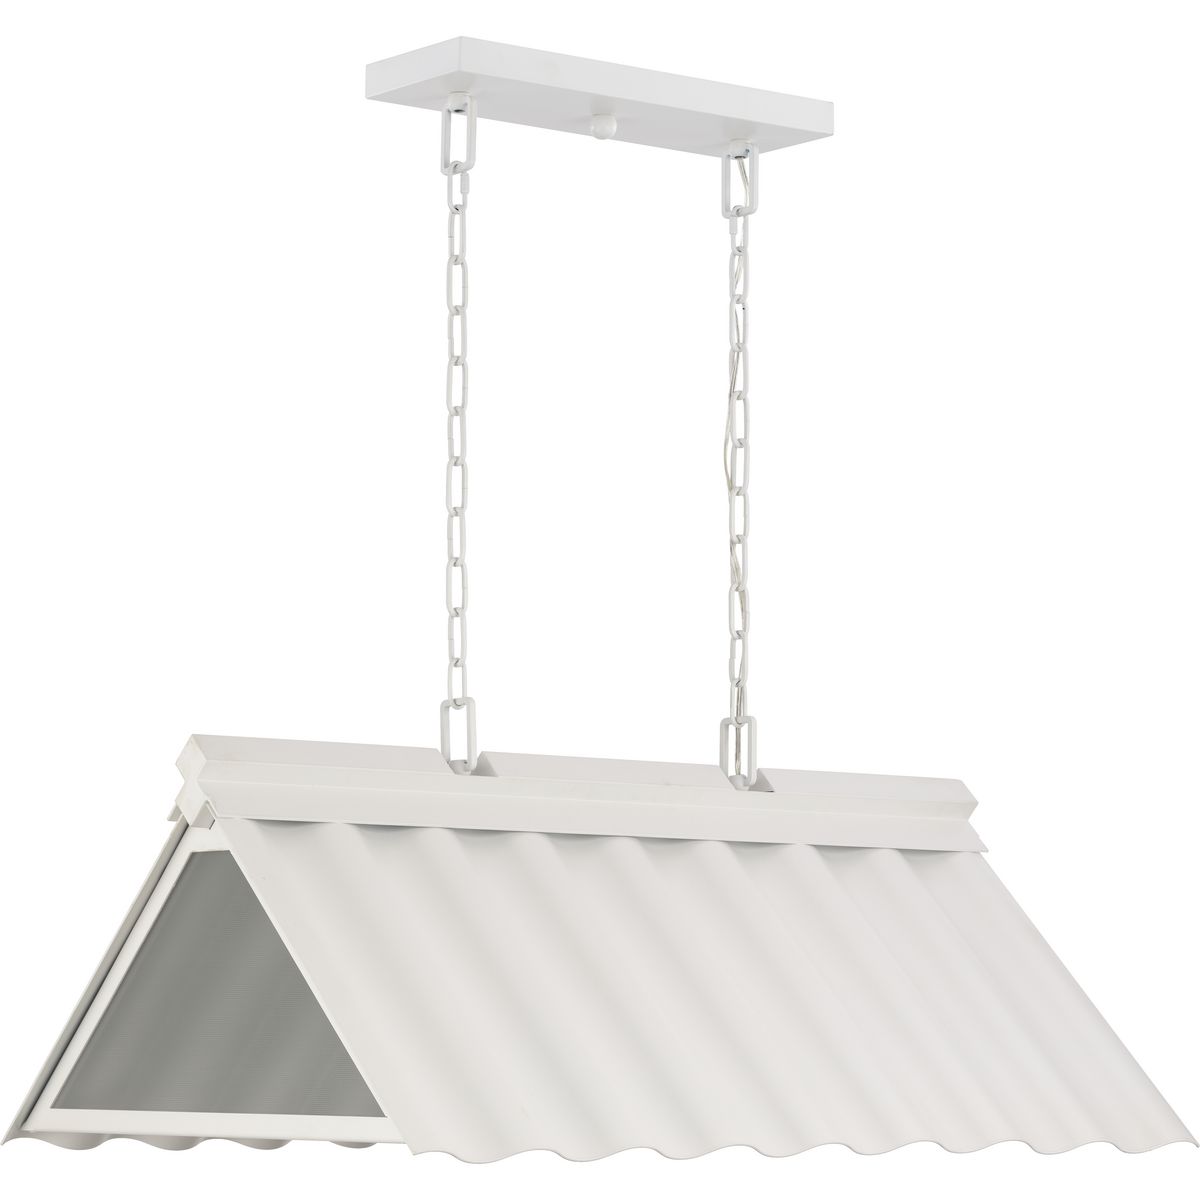 POINT DUME® by Jeffrey Alan Marks for Progress Lighting Edgecliff Ashelter White Finish Outdoor Hanging Pendant - Damp Location Listed